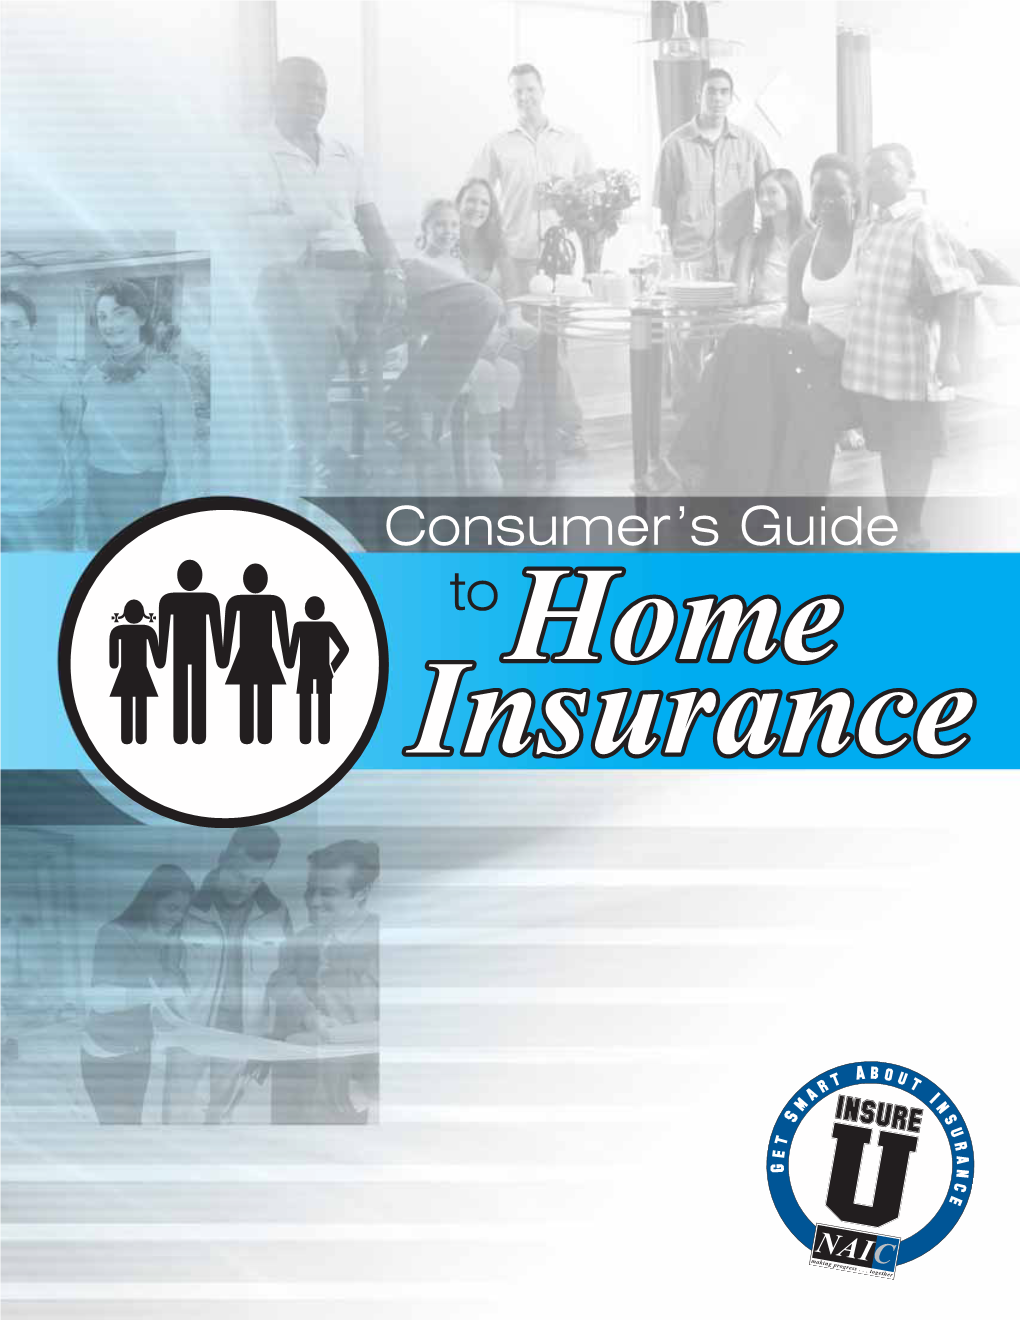 Consumer's Guide to Home Insurance